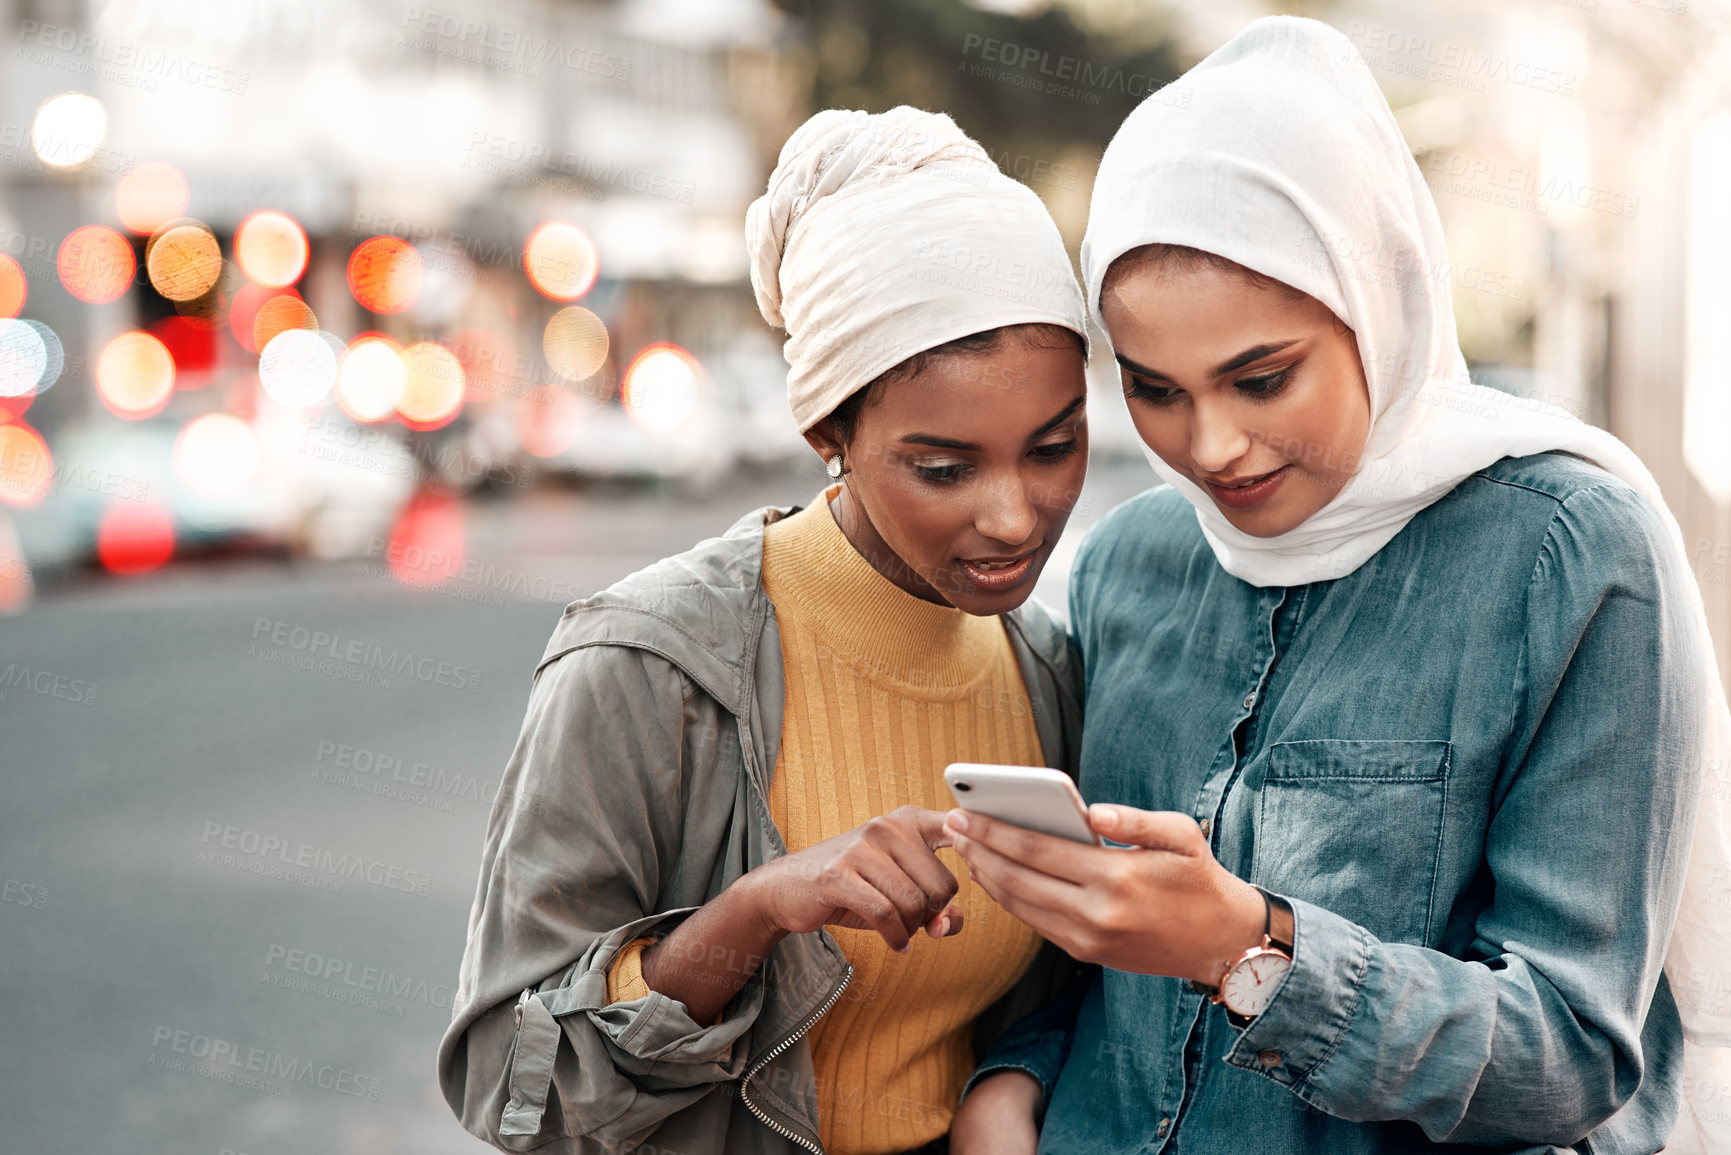 Buy stock photo Cropped shot of two attractive young women wearing headscarves and standing together while using a cellphone in the city